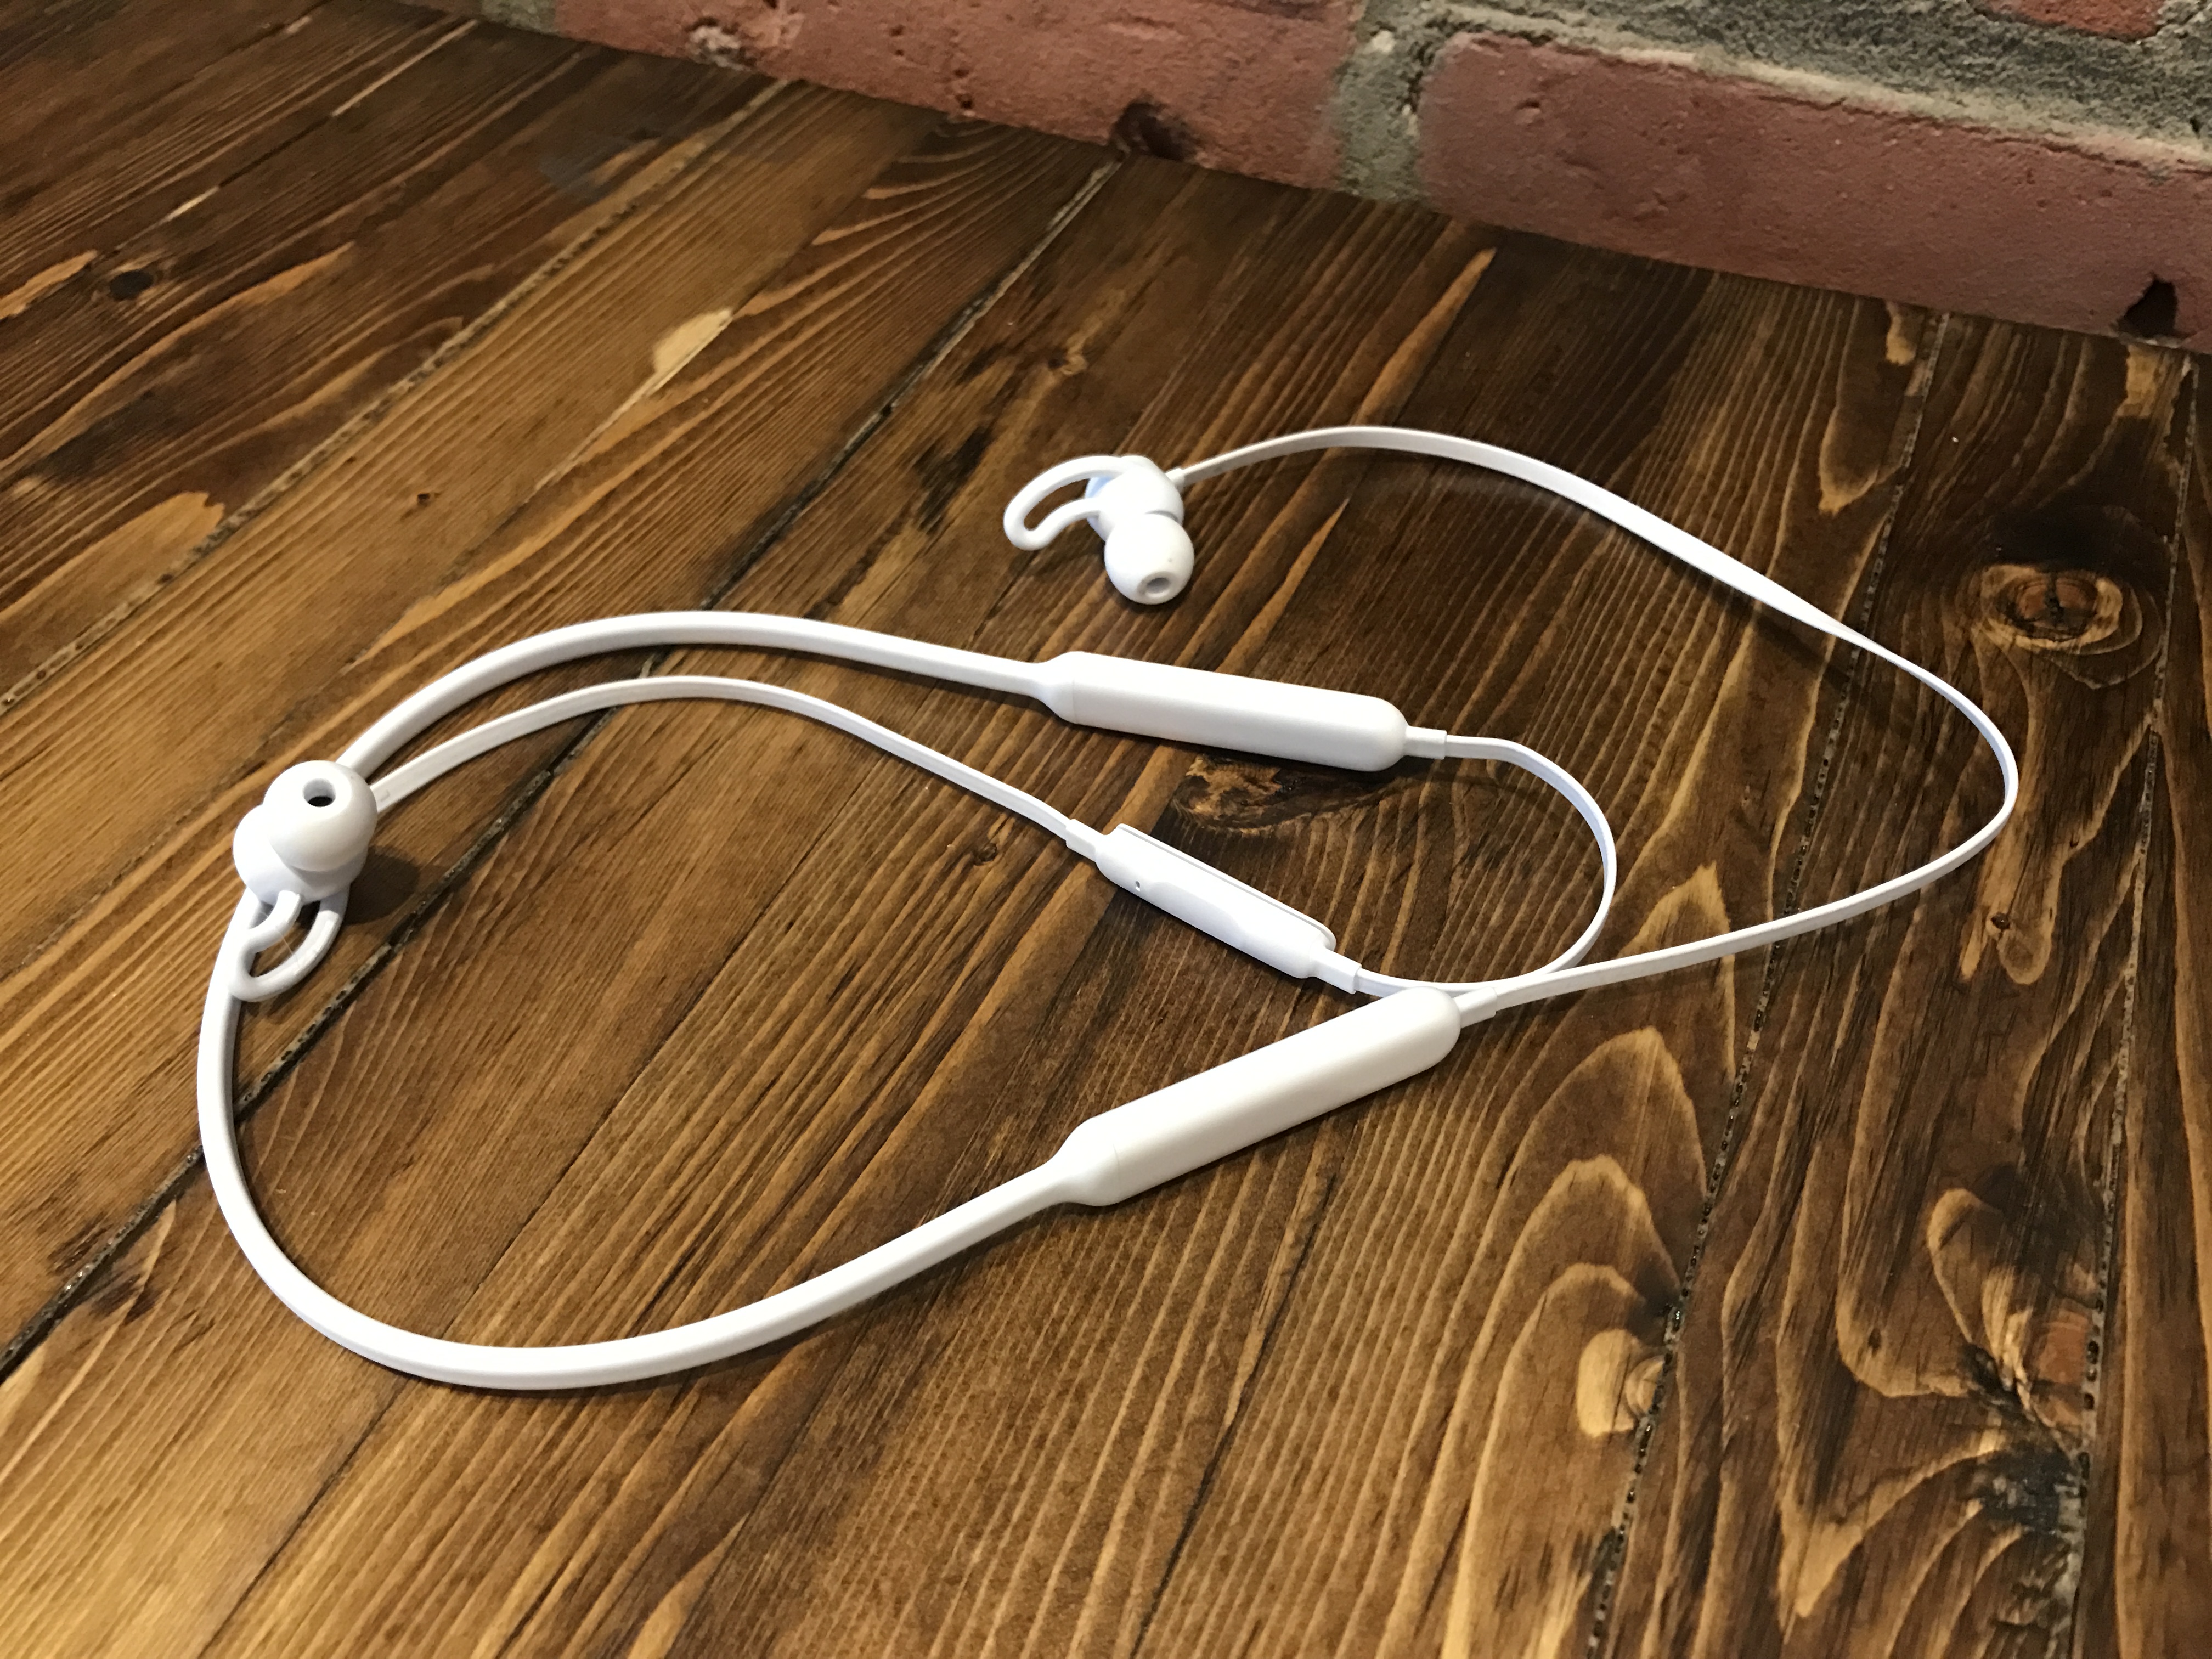 Beats X review: Apple made the perfect 